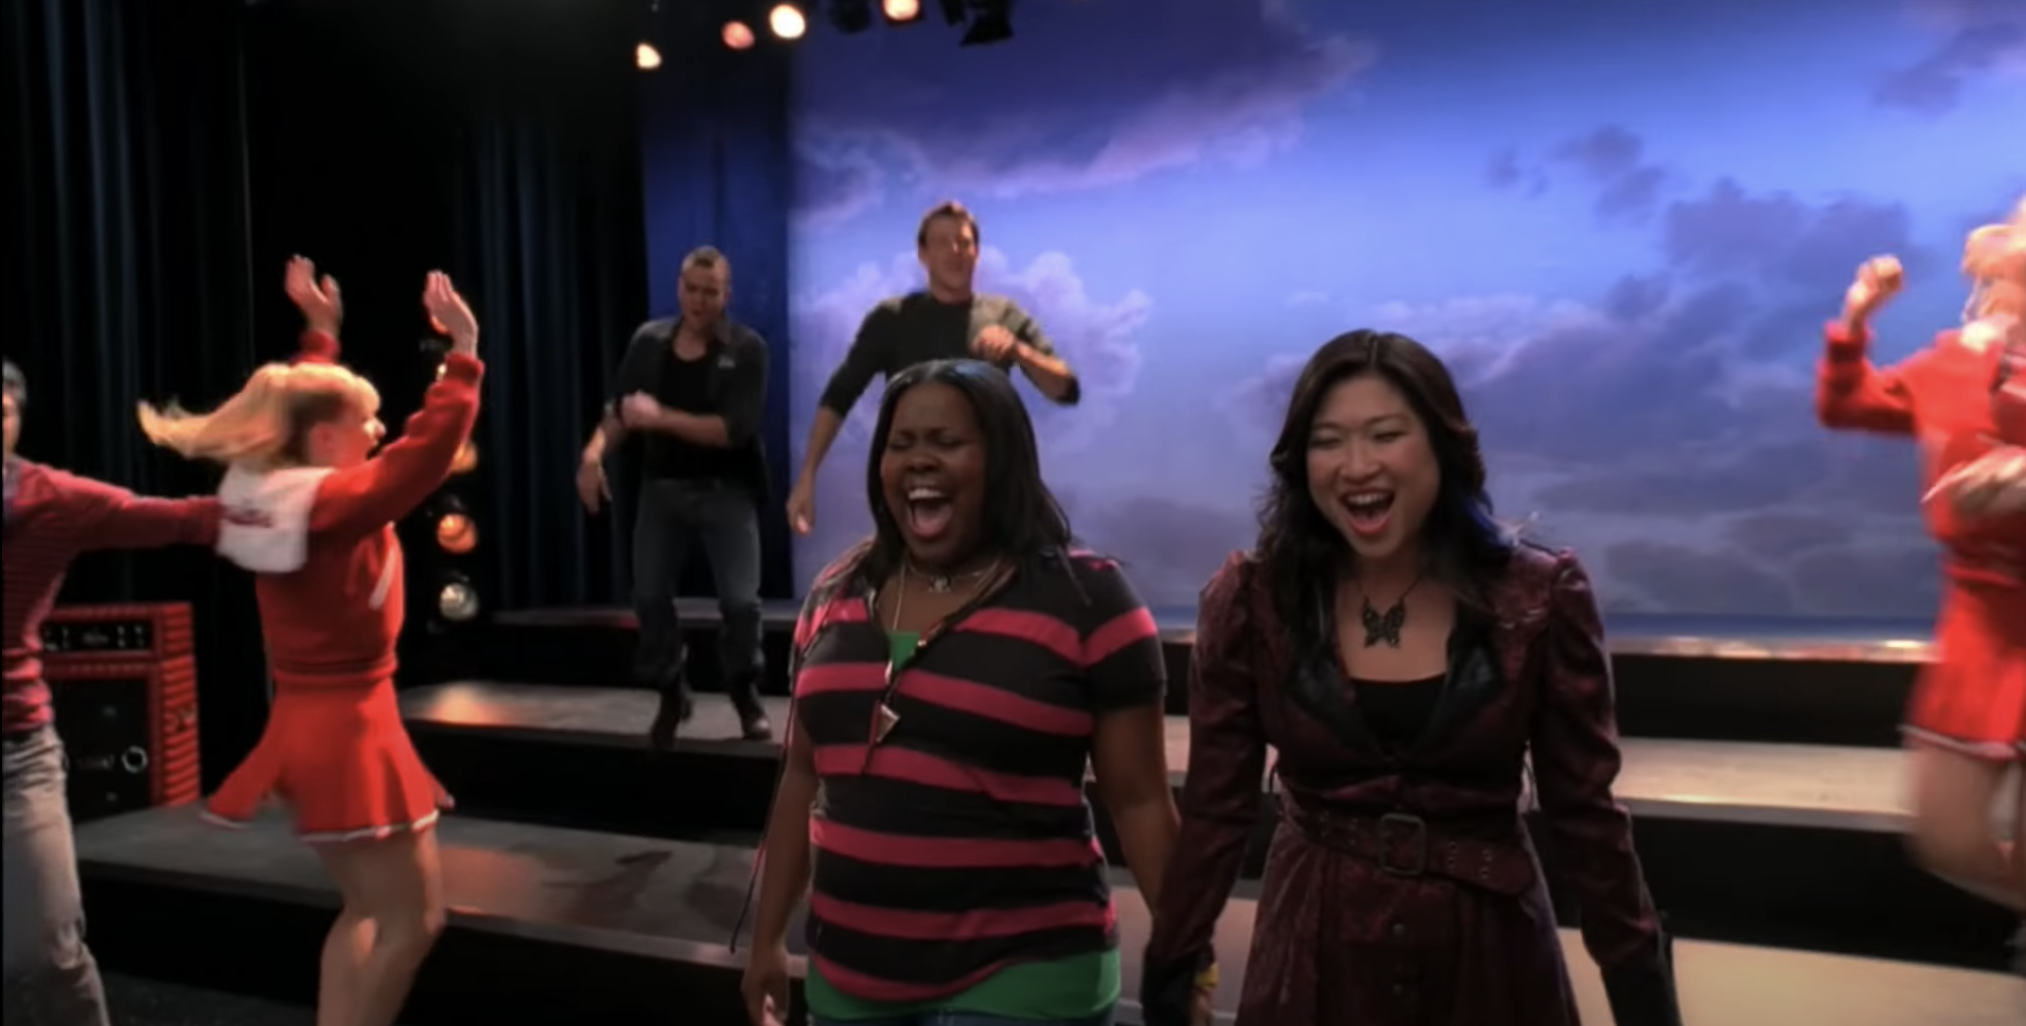 Mercedes and Tina singing onstage while the New Directions dance around them